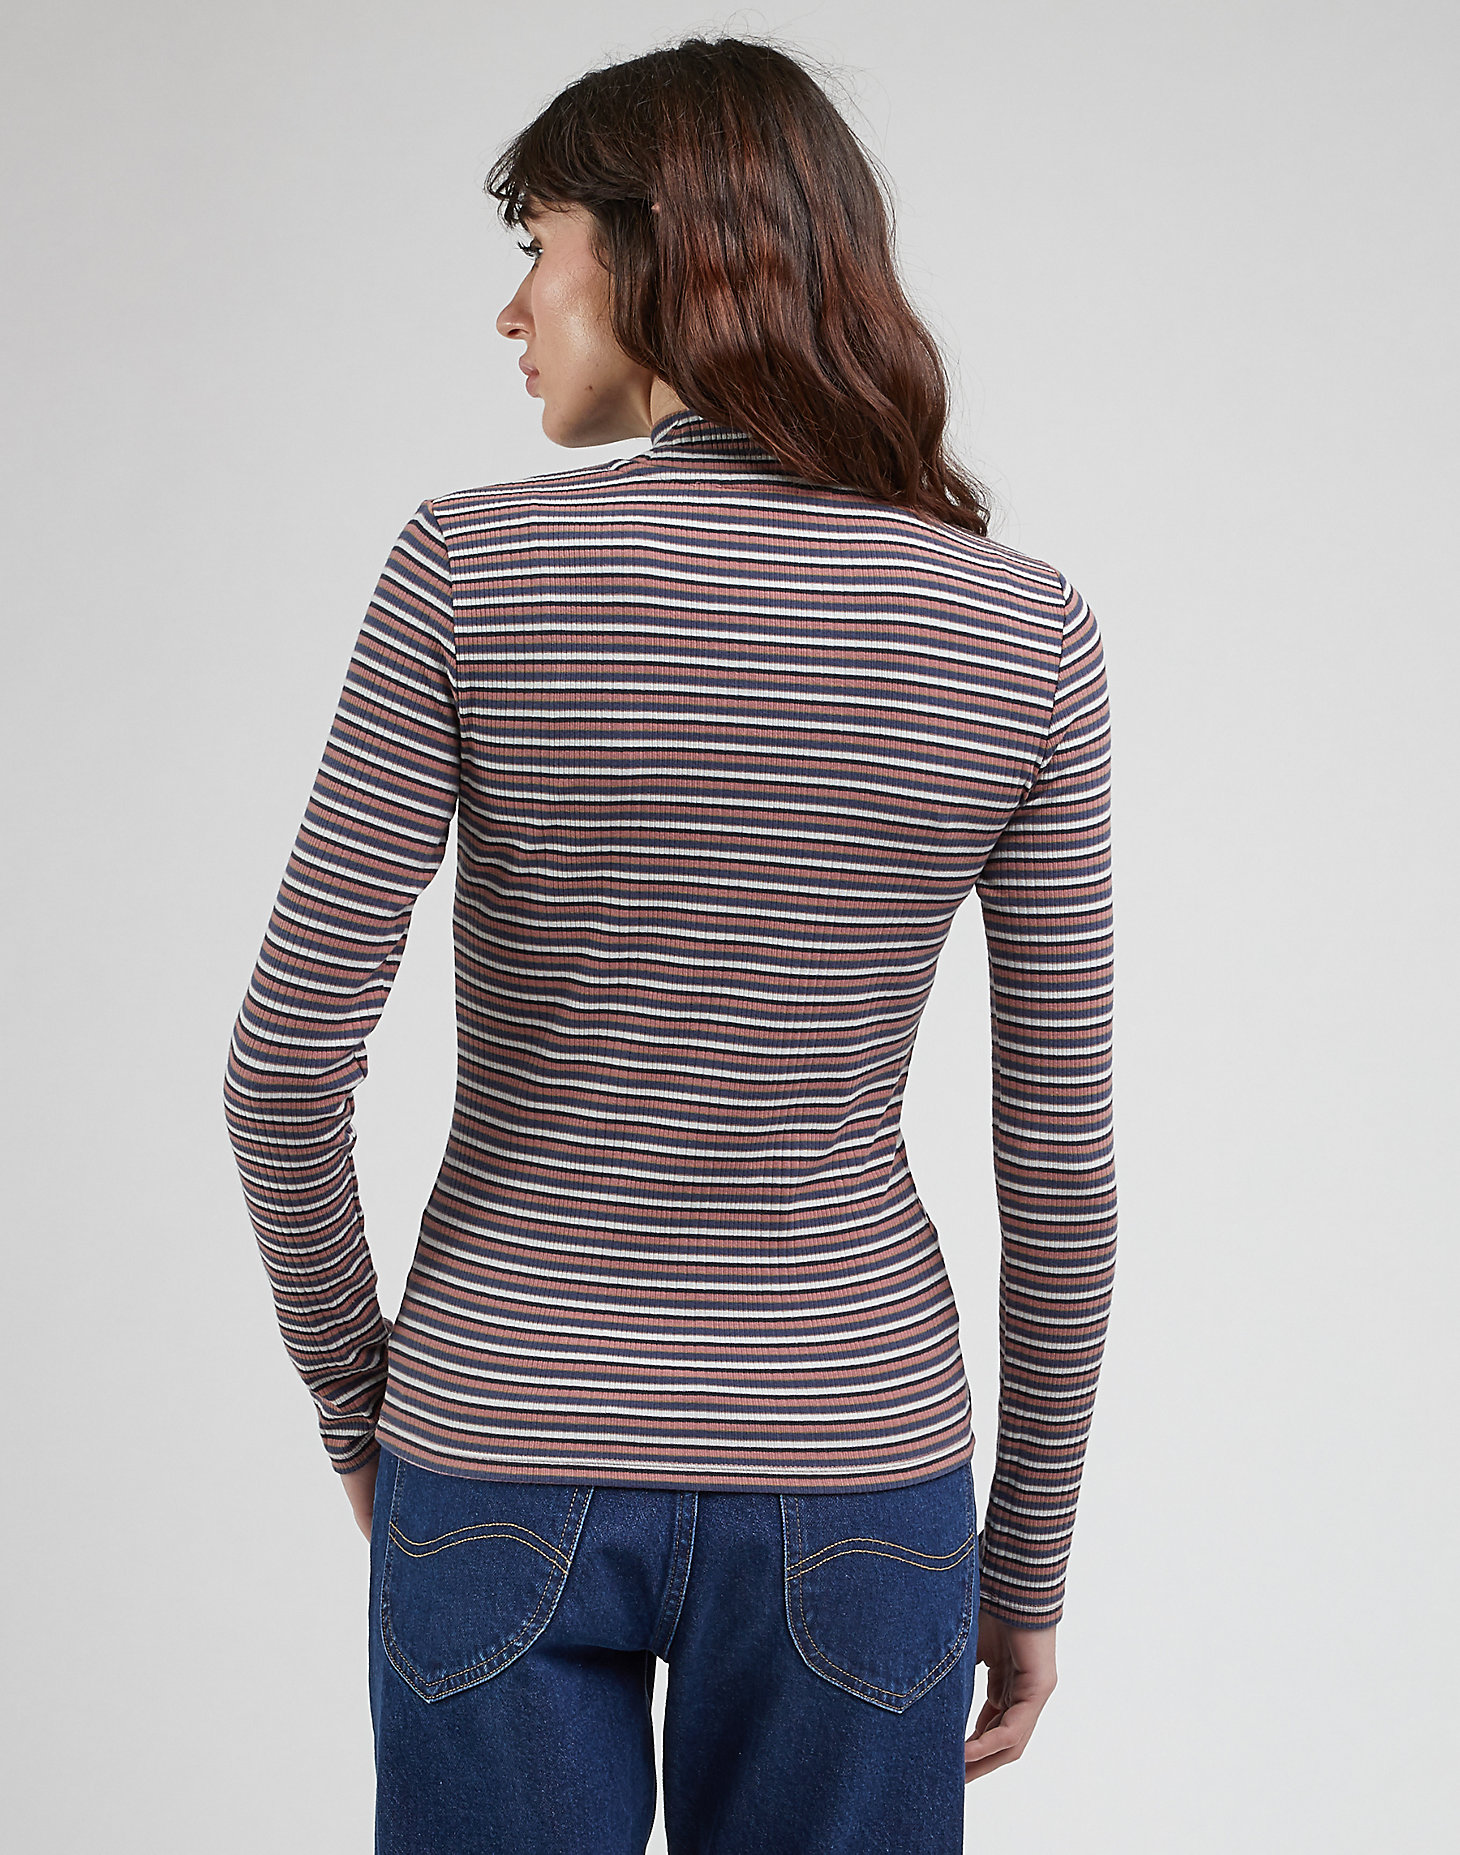 Ribbed Long Sleeve Striped Tee in Dark Mauve alternative view 1